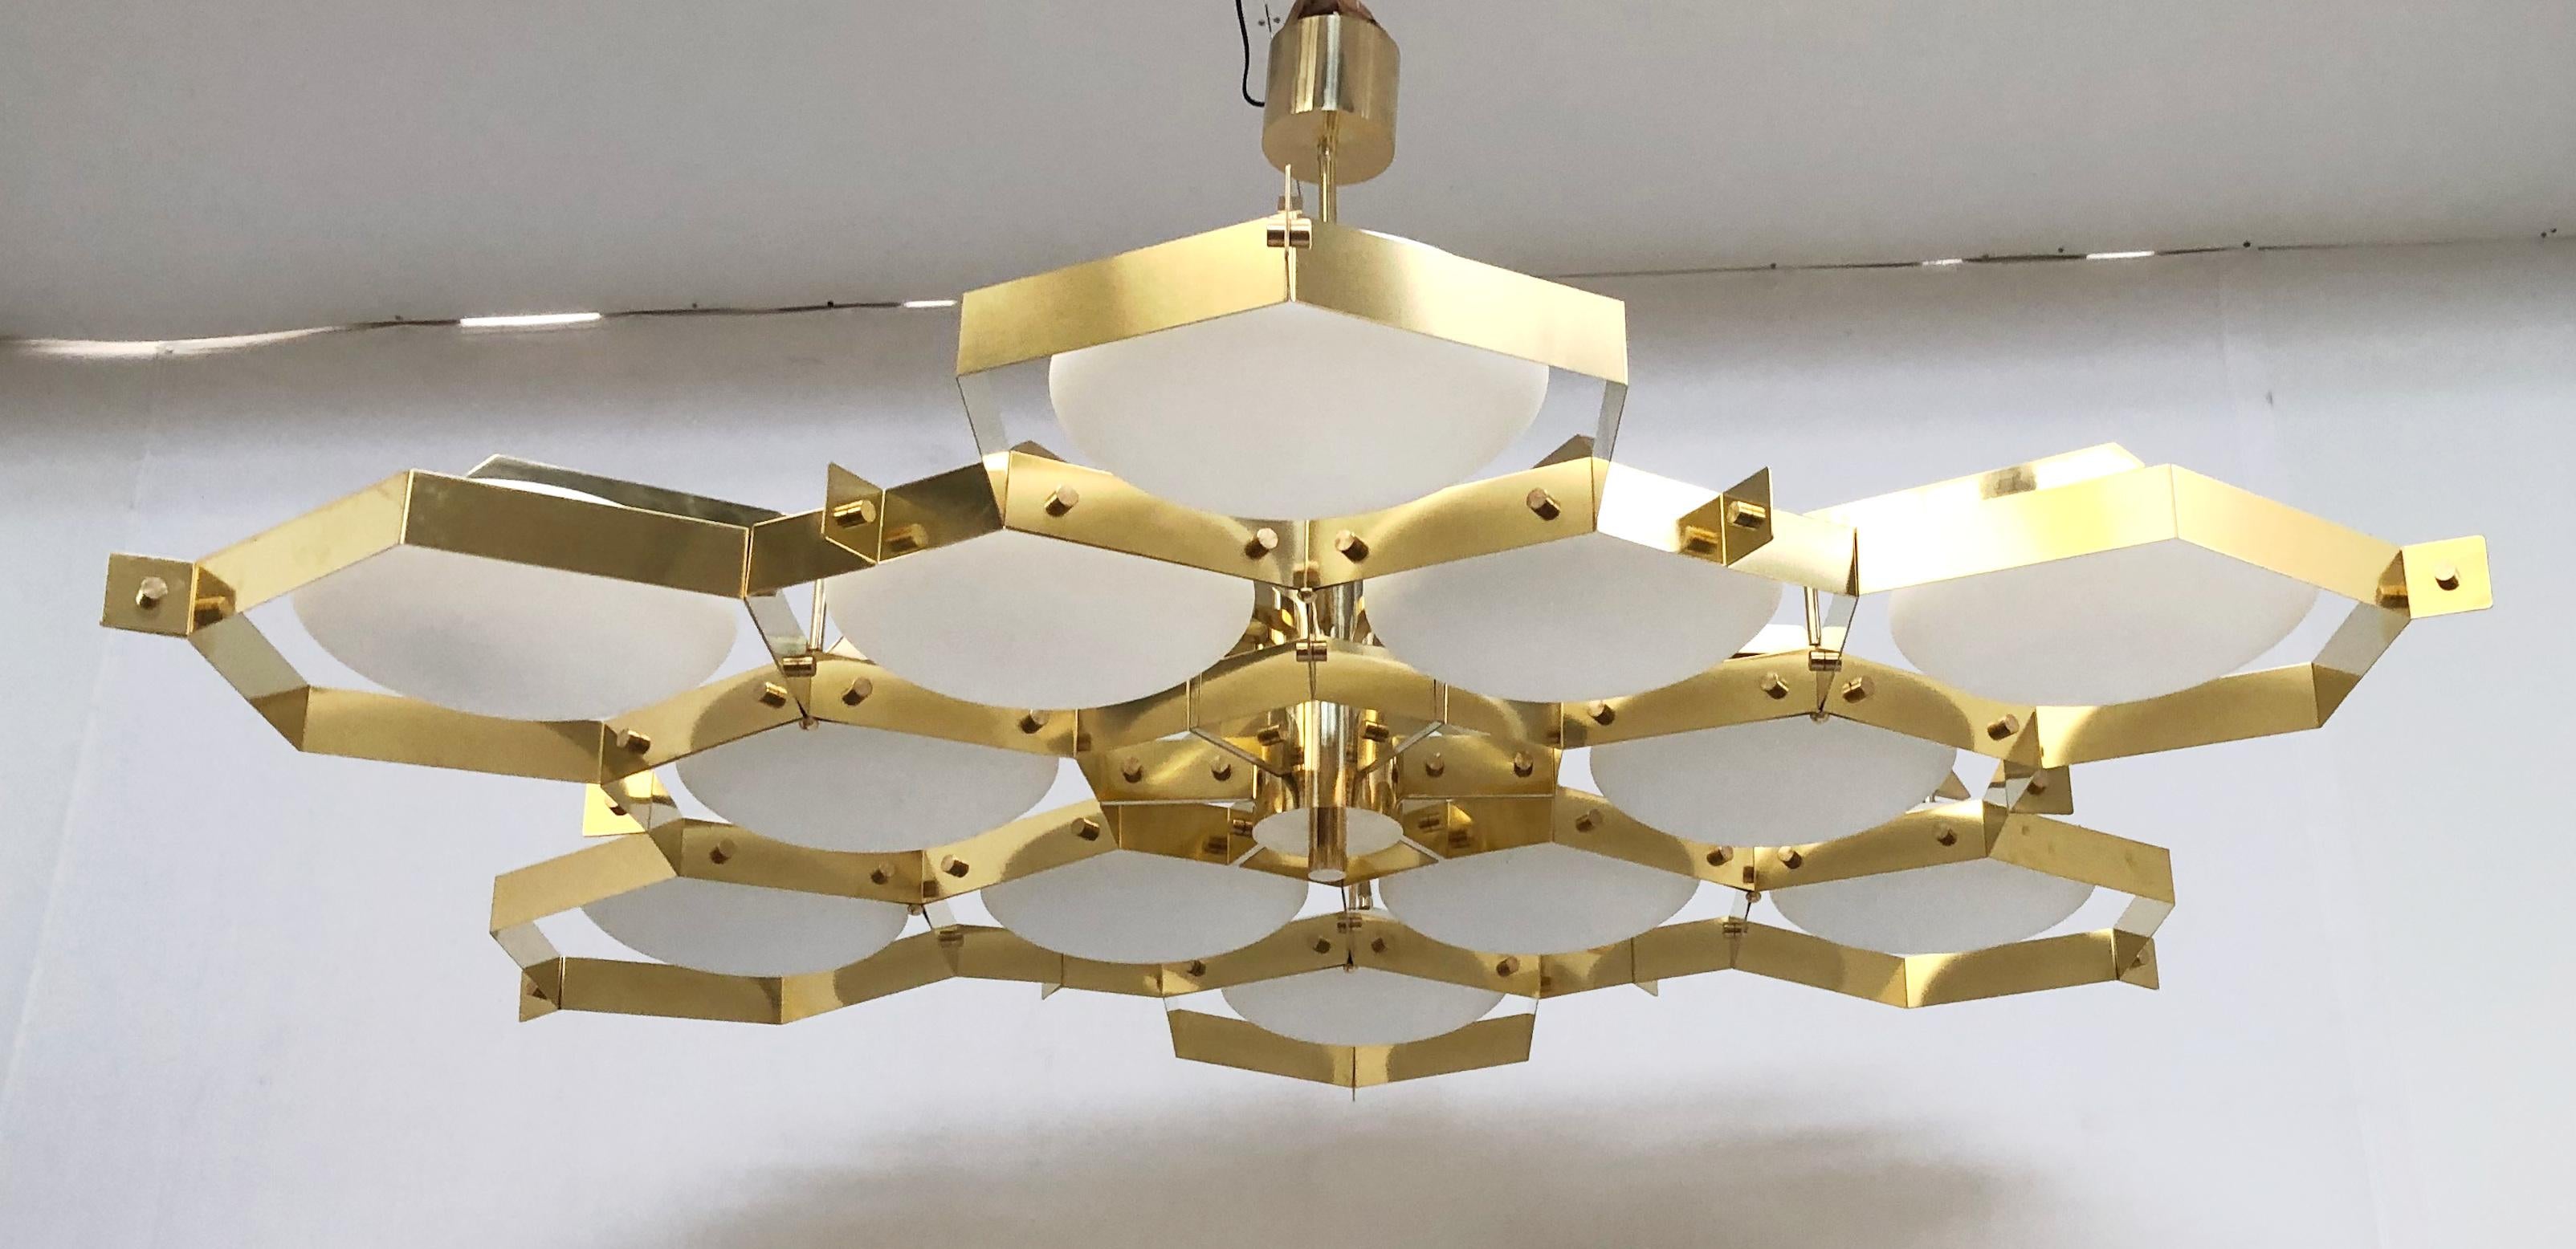 Italian chandelier with Murano glass shades mounted on solid brass frame / designed by Fabio Bergomi for Fabio Ltd / Made in Italy
12 lights / E12 or E14 type / max 40W each
Measures: Diameter 74 inches, height 30 inches
Order only / this item ships